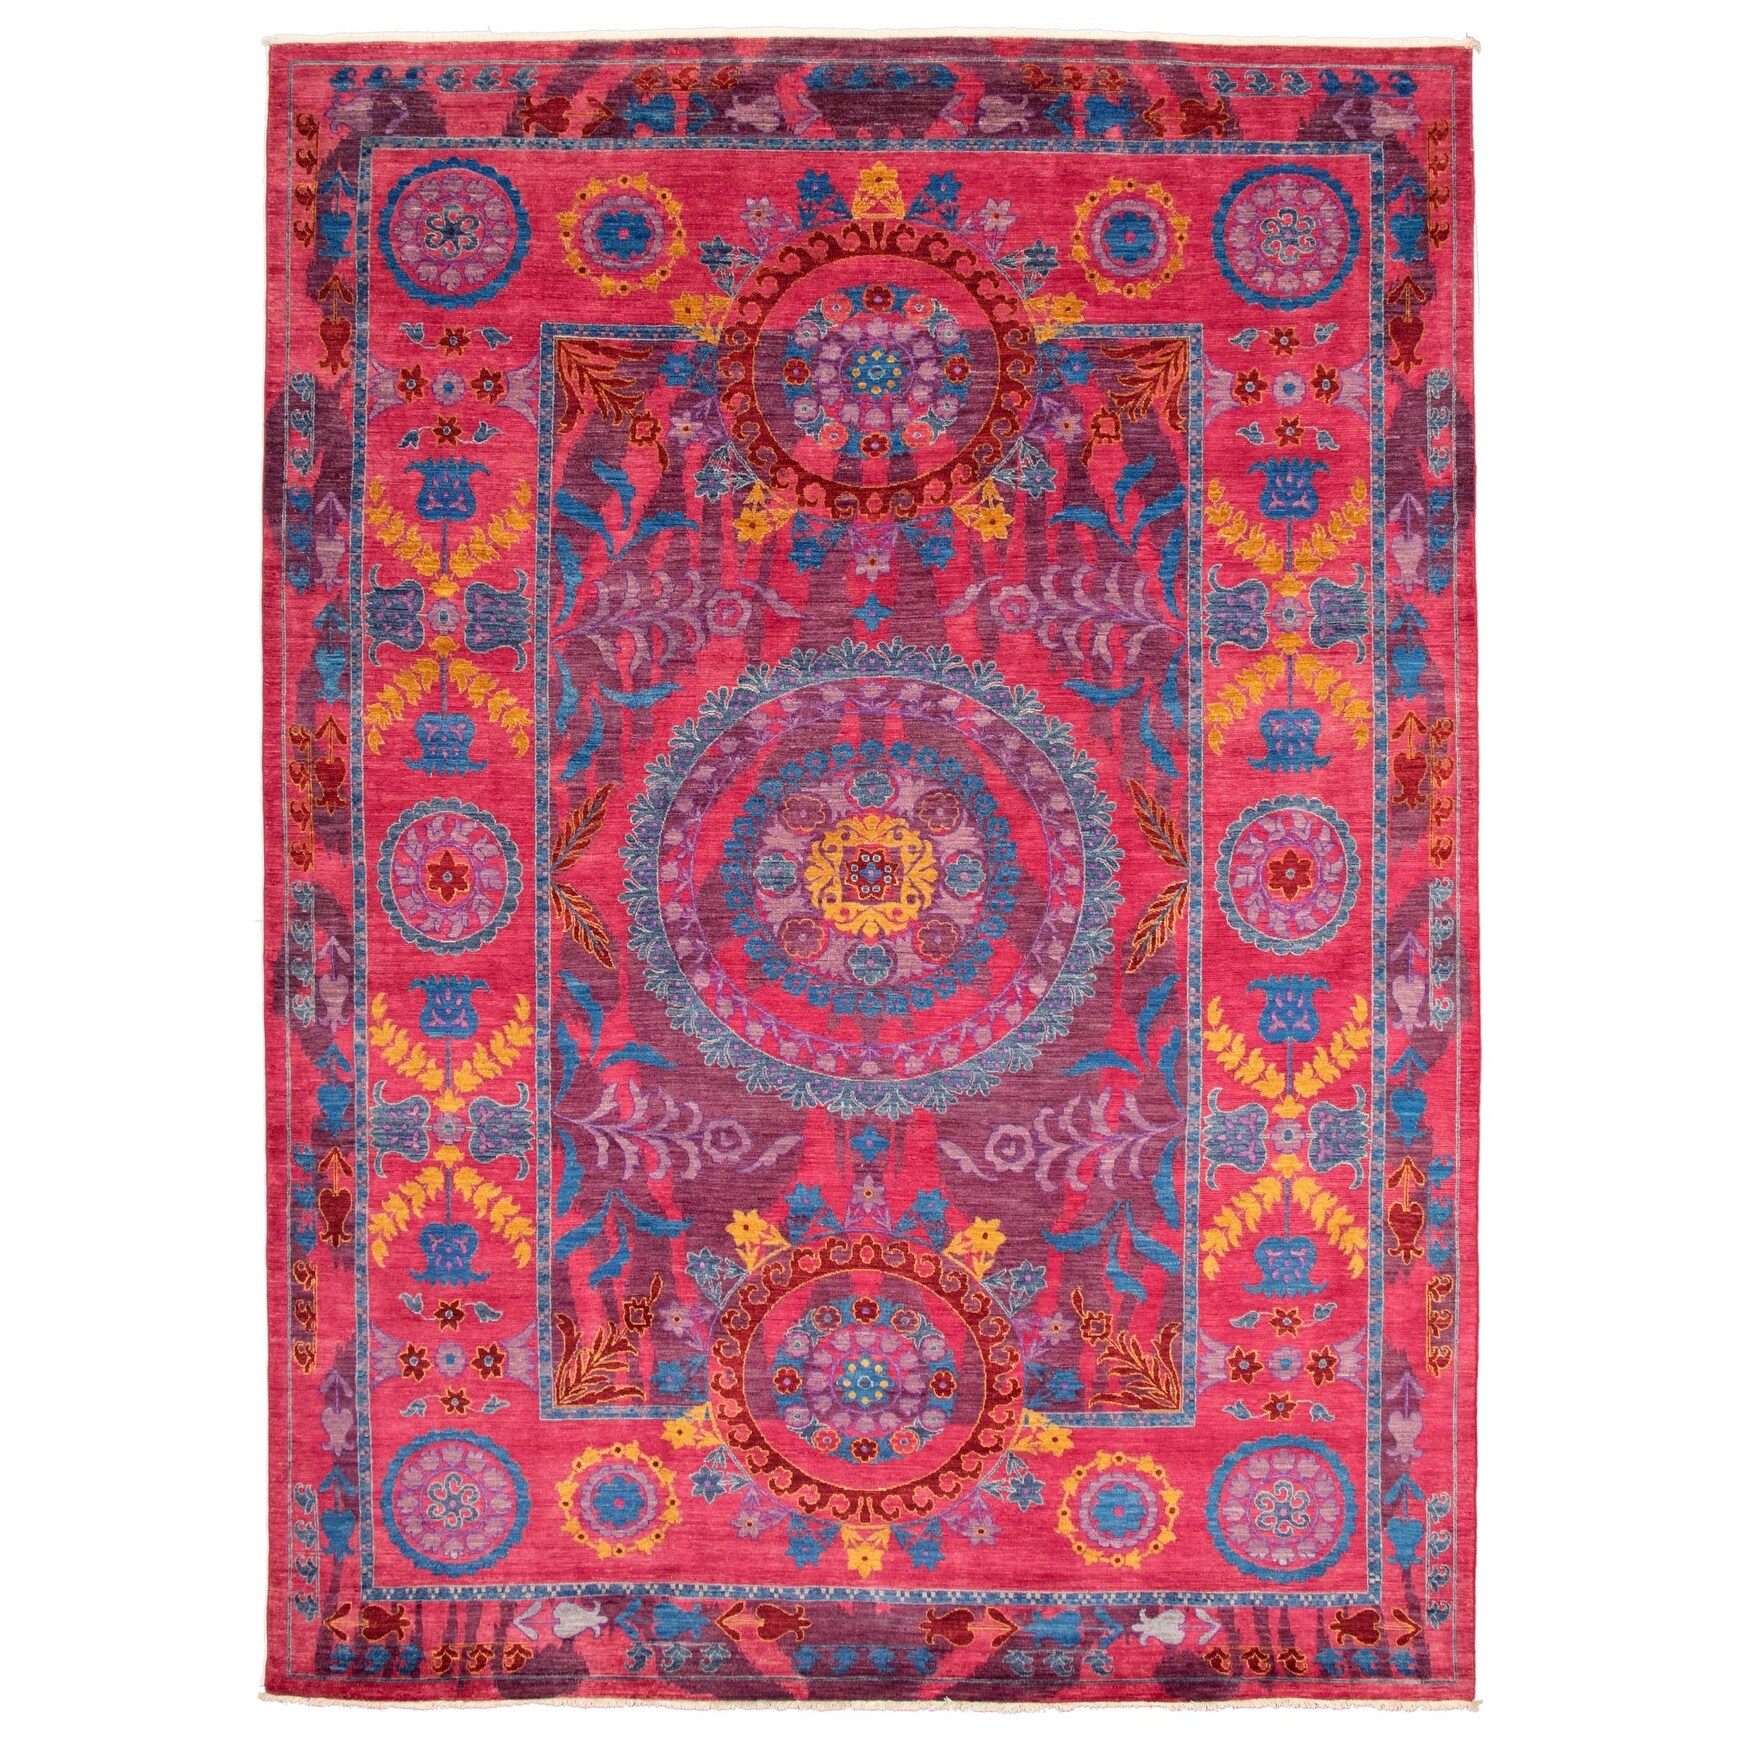 Bedroom 310991 Signature Collection Floral Blue Rug 7'10 x 10'4 Hand-Knotted Wool Rug eCarpet Gallery Large Area Rug for Living Room